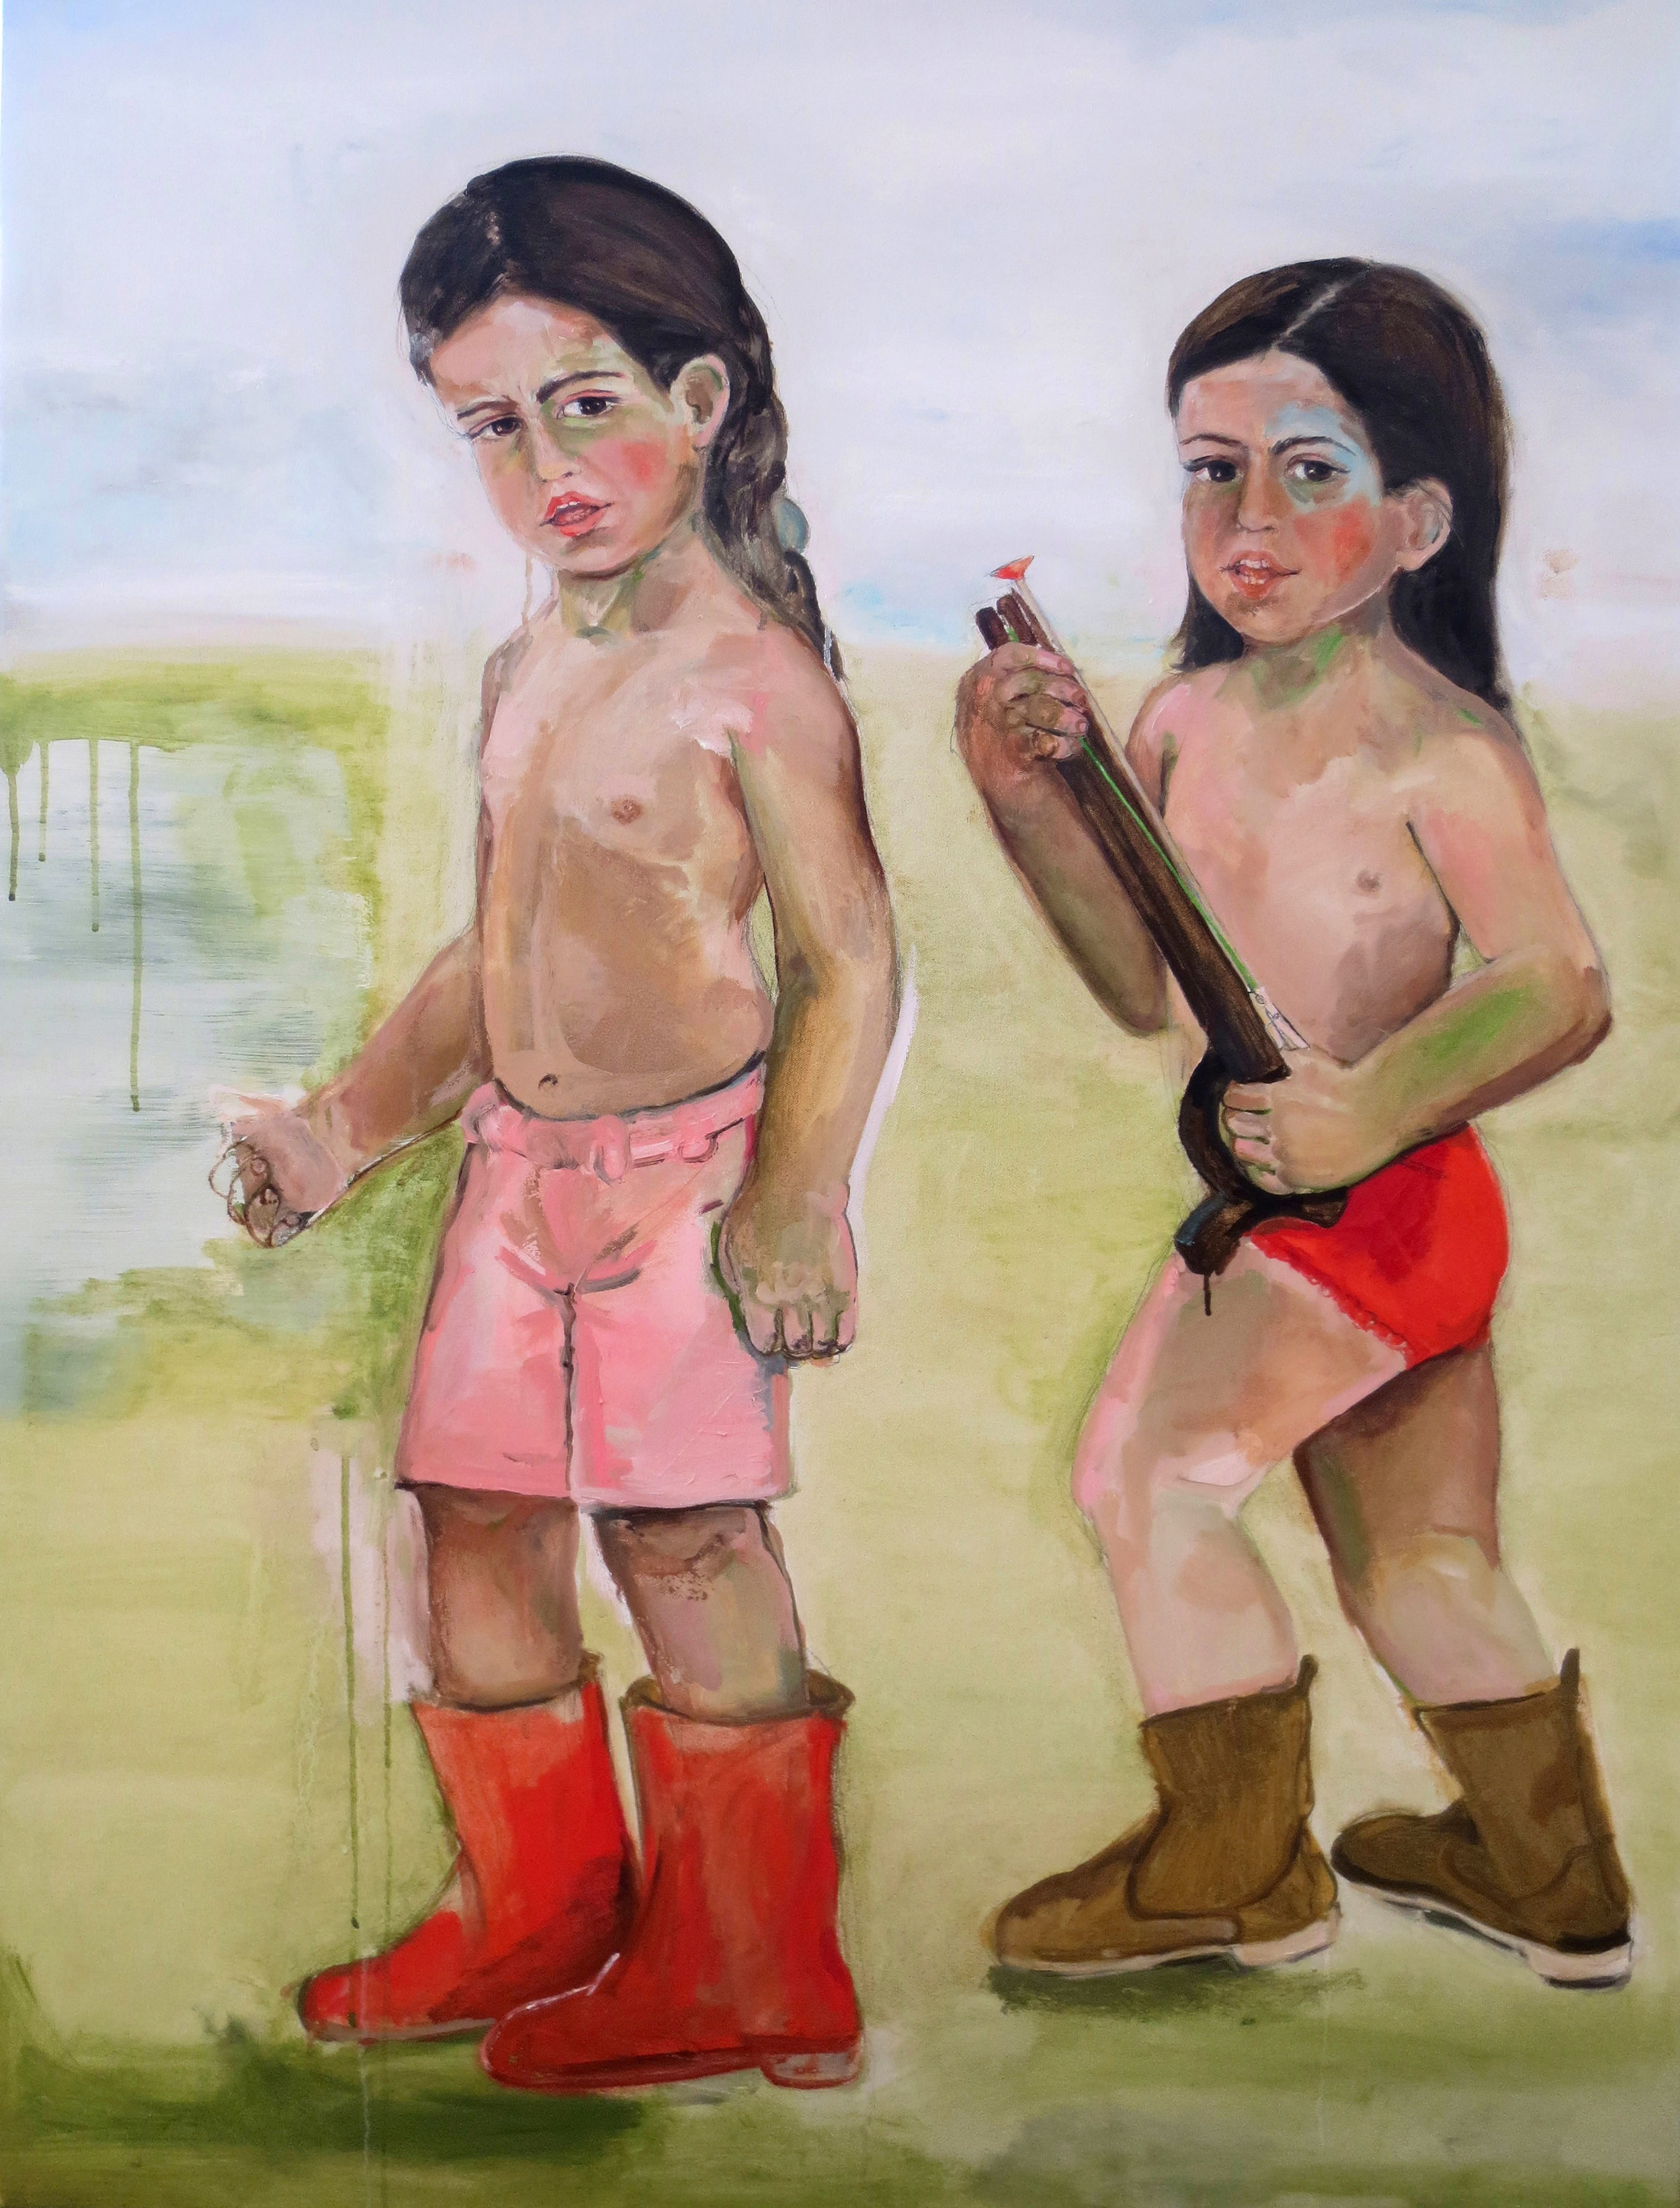 Girls Playing, 2012, Oil on canvas, 48 x 60 in.